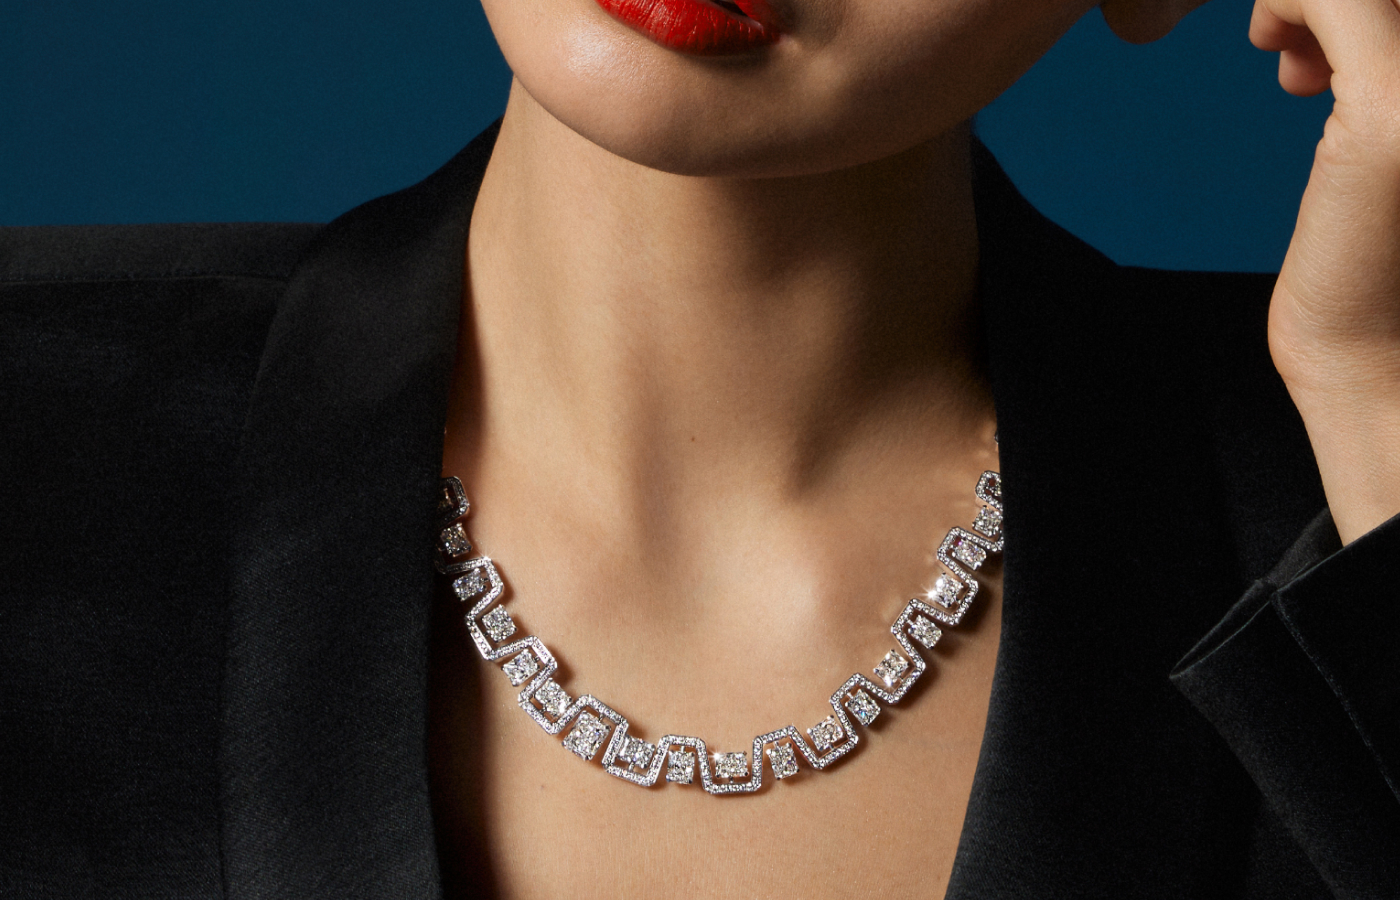 Bucherer Fine Jewellery necklace from the Manhattan High Jewellery collection with 49 radiant-cut diamonds and 602 brilliant-cut diamonds in 18k white gold 